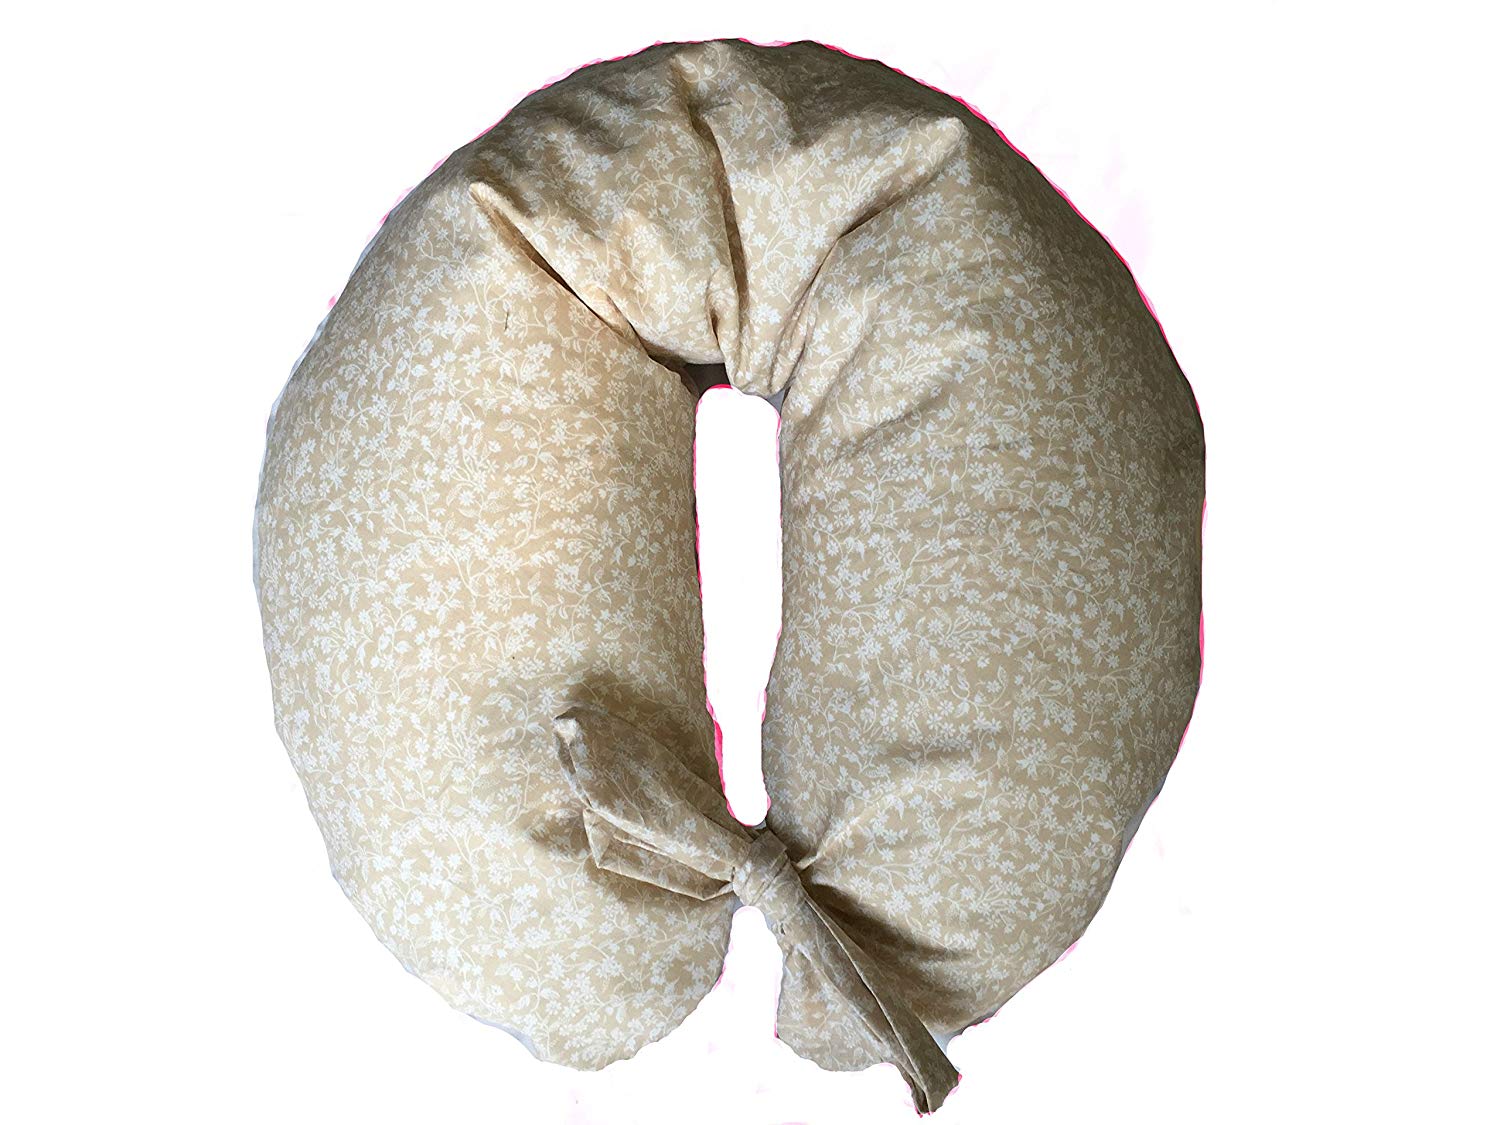 Merrymama – Filled with Organic Spelt Nursing Pillow and Lining with laces/130)